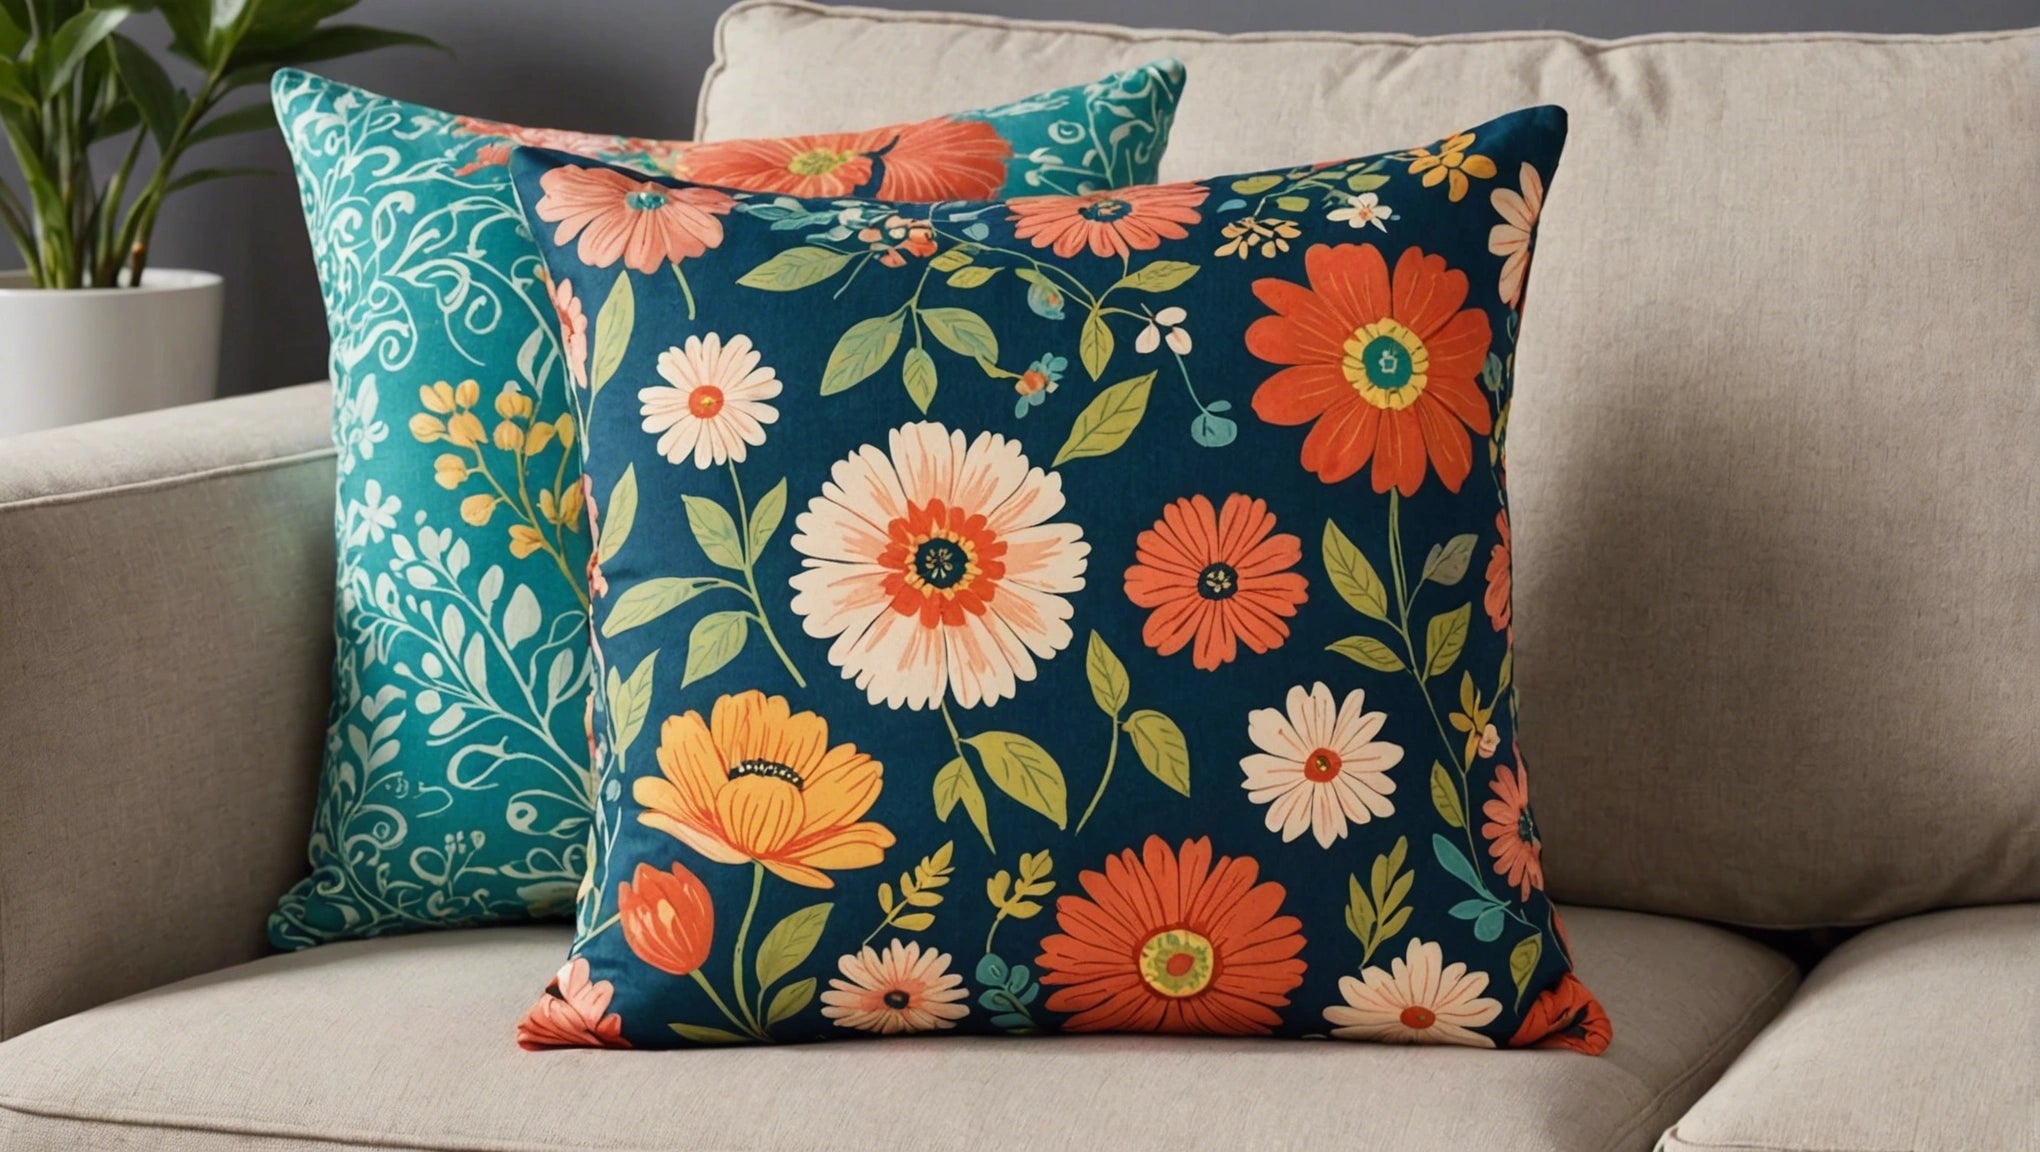 Elevate Your Home Decor with a Floral Patterned Pillow Cover - FABDIVINE LLC